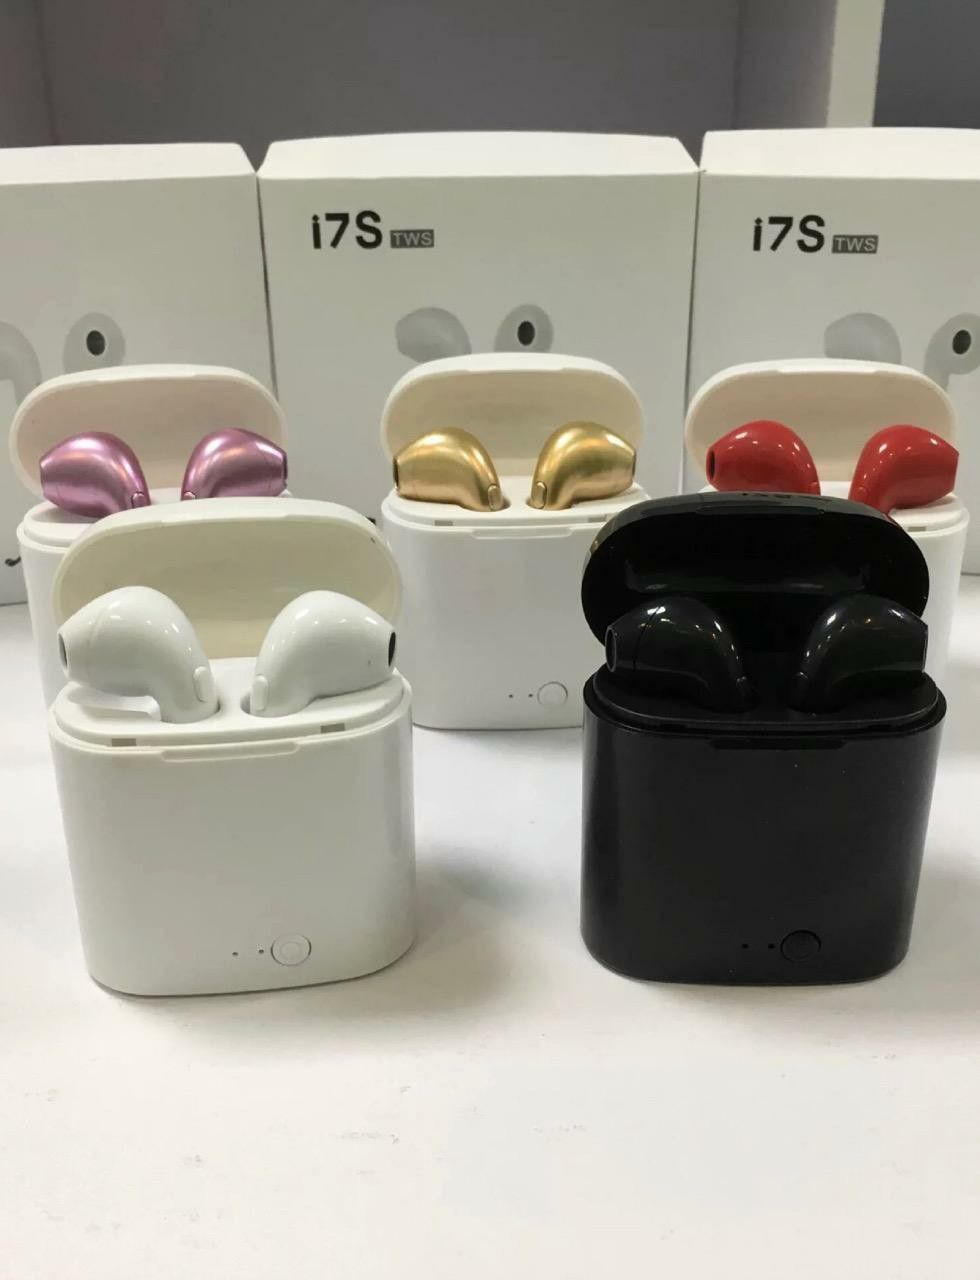 i7S Wireless Bluetooth Headphone Earbuds For iPhone,Android,LG,LAPTOP With Charging BOX UNIVERSAL 5 🔥🔥 HOT 🔥DIFFERENT🔥COLORS 🔥🔥🔥